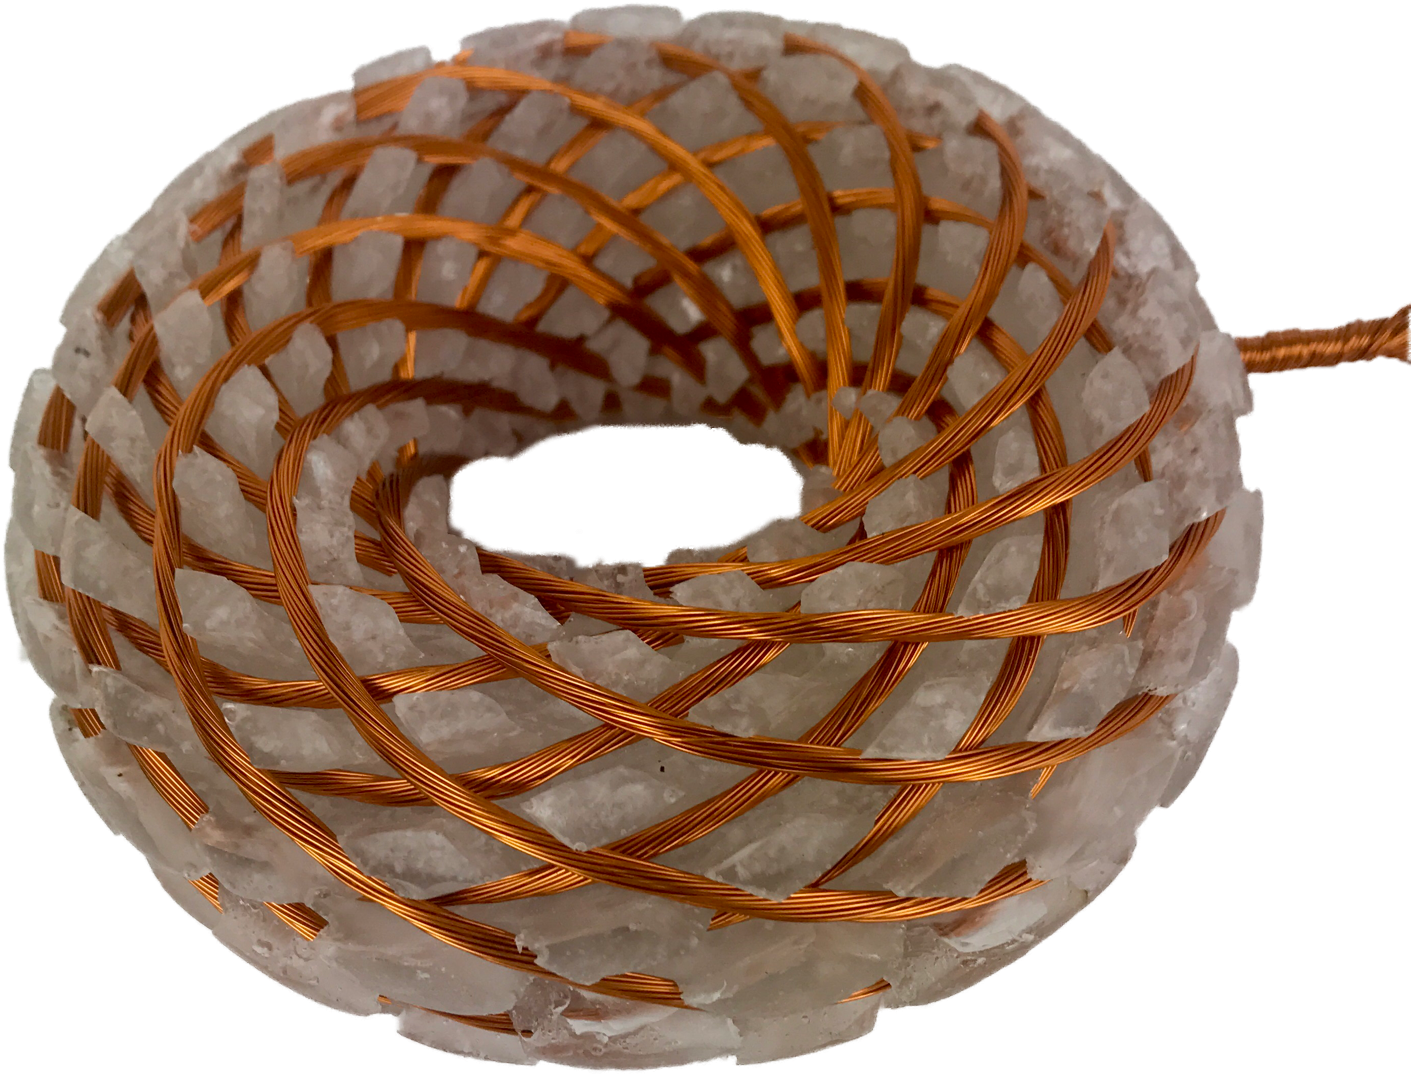 Abstract Copper Wire Doughnut Sculpture.png